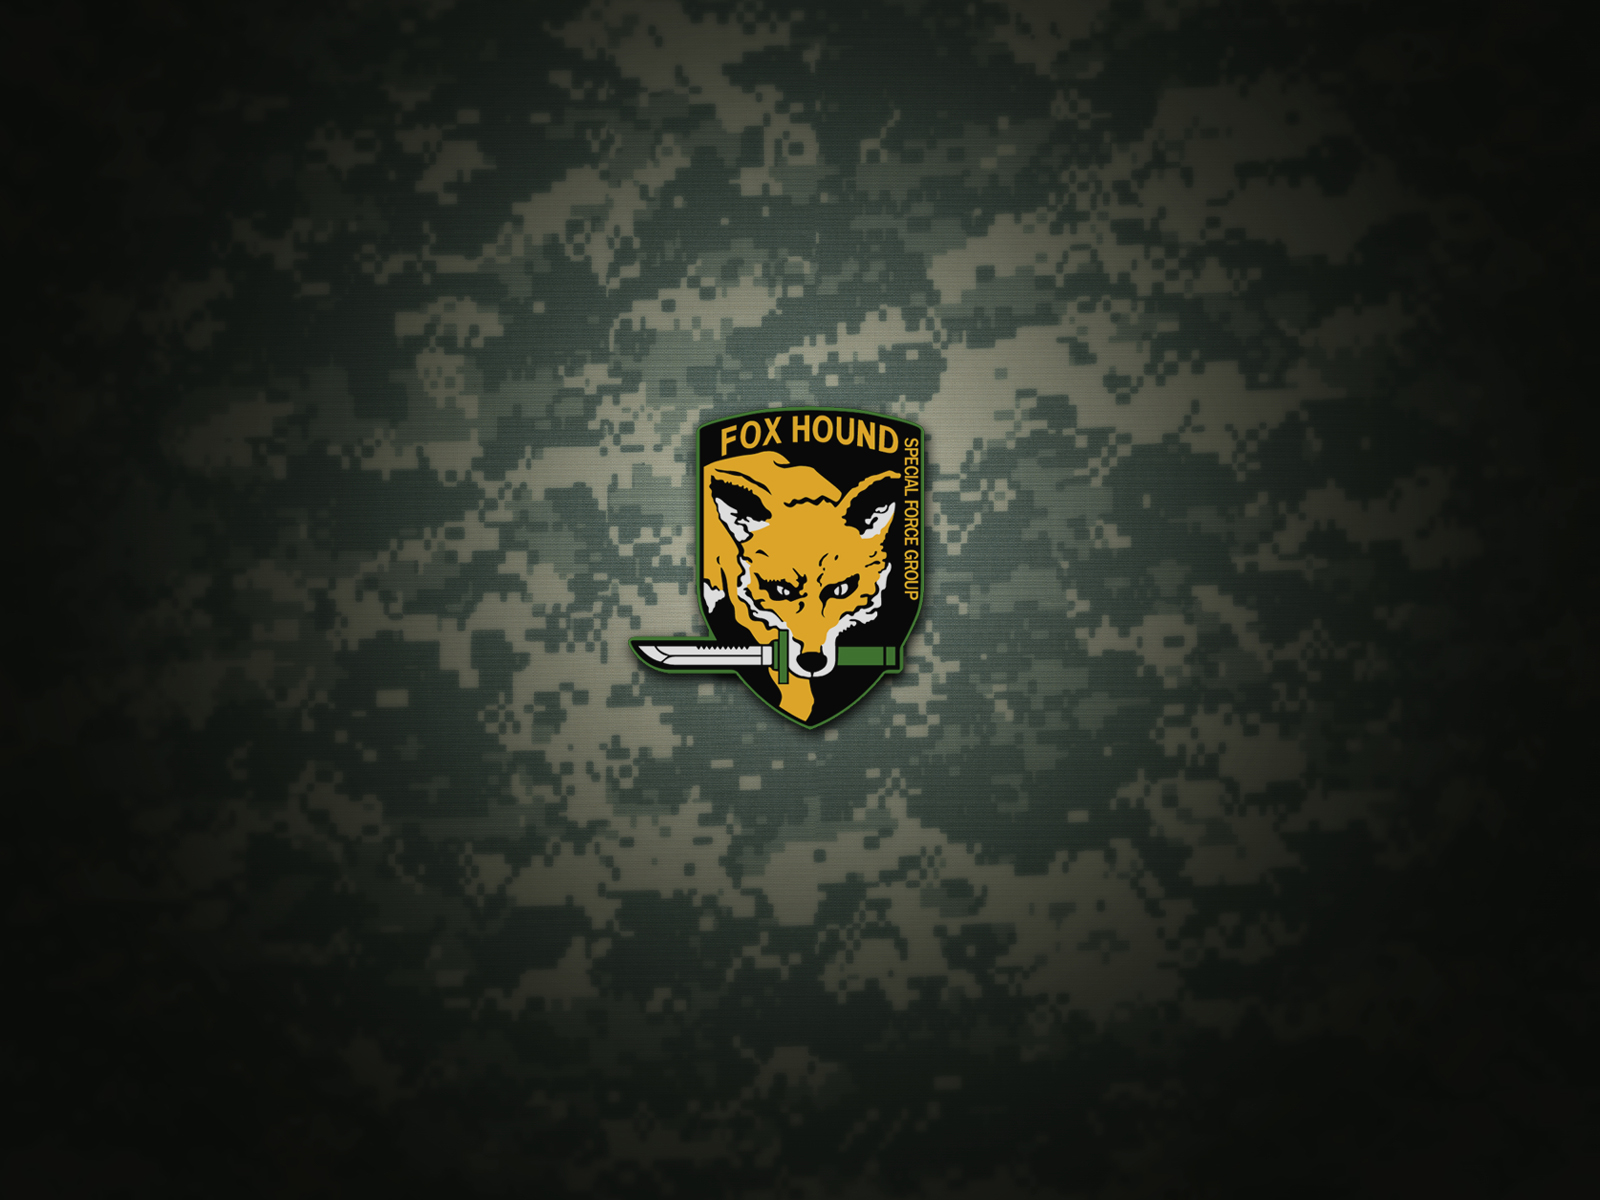 army, metal gear solid, foxhound (metal gear), metal gear, military, video game